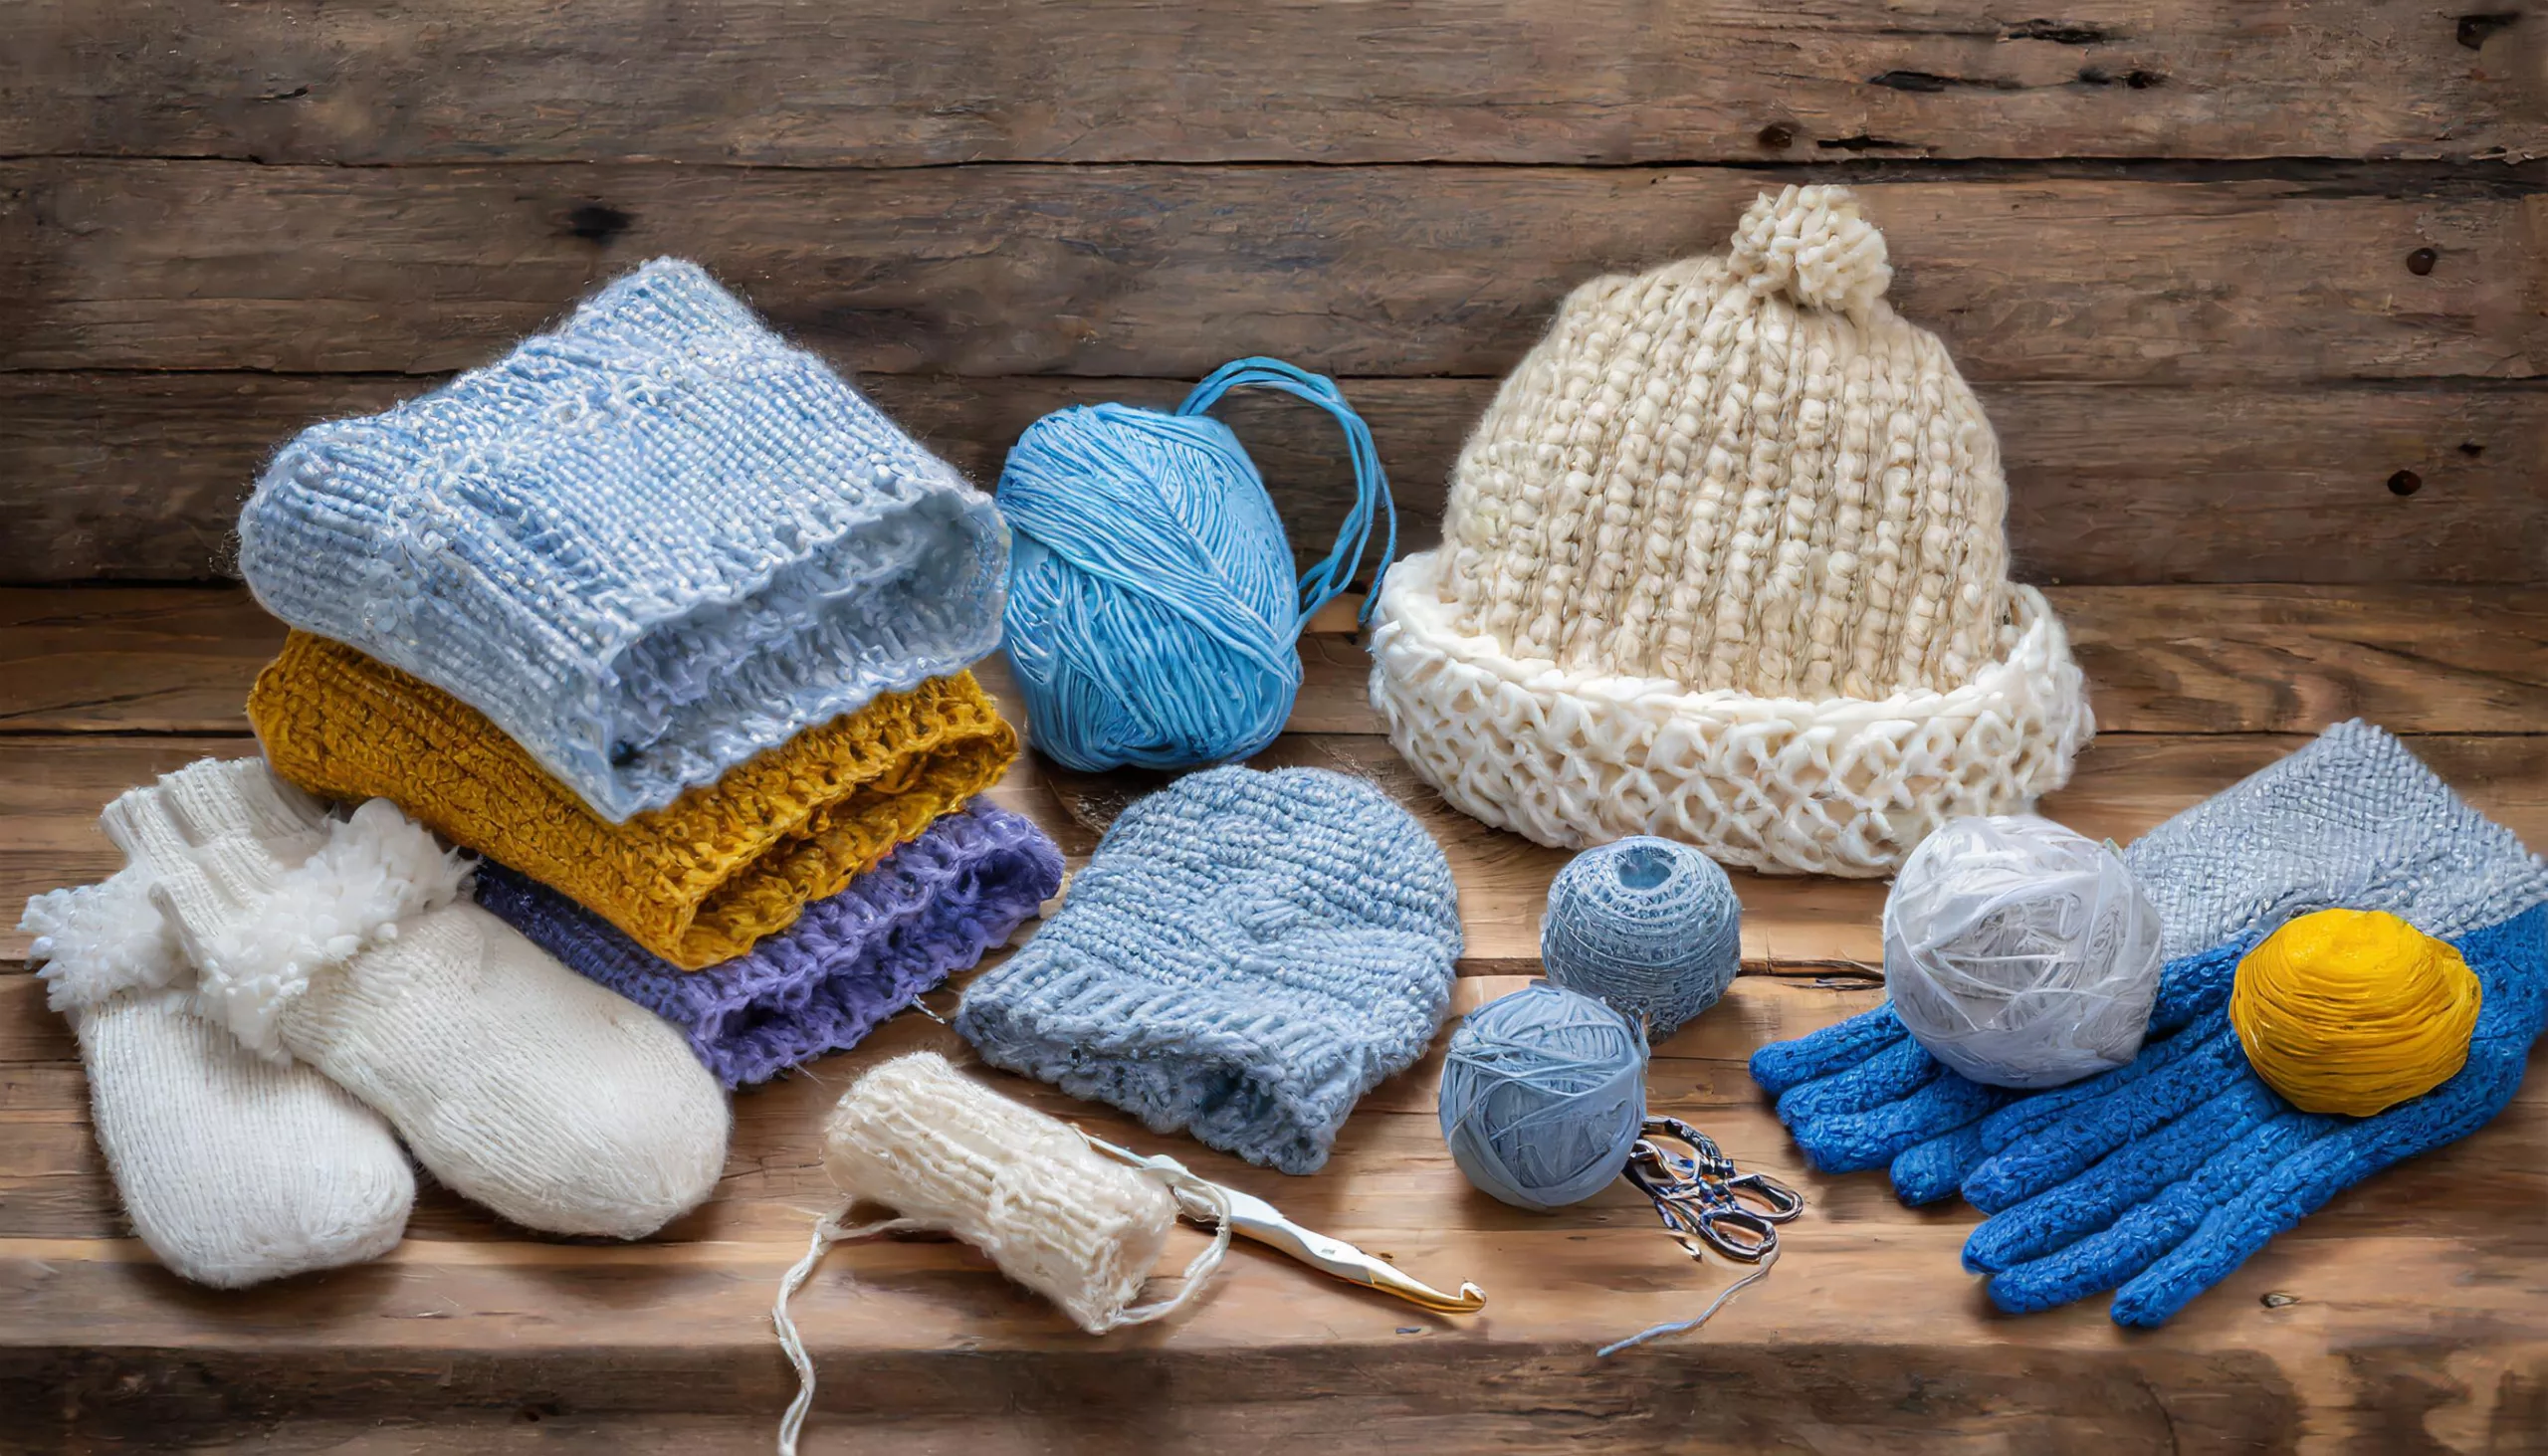 A photo of a selection of knitted items